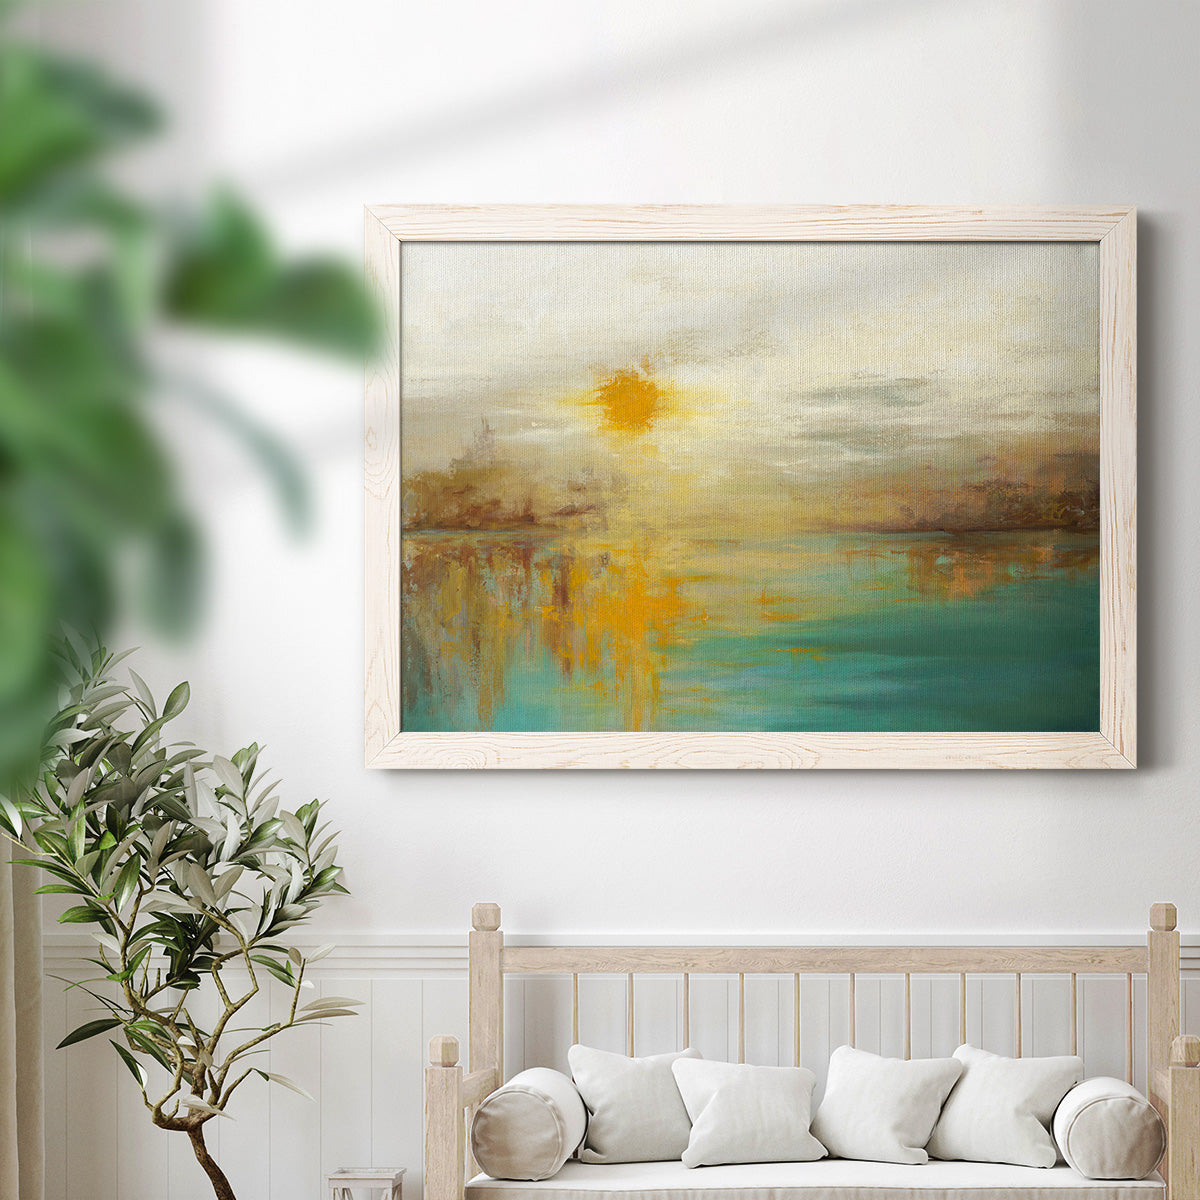 Last Day of Summer -Premium Framed Canvas - Ready to Hang